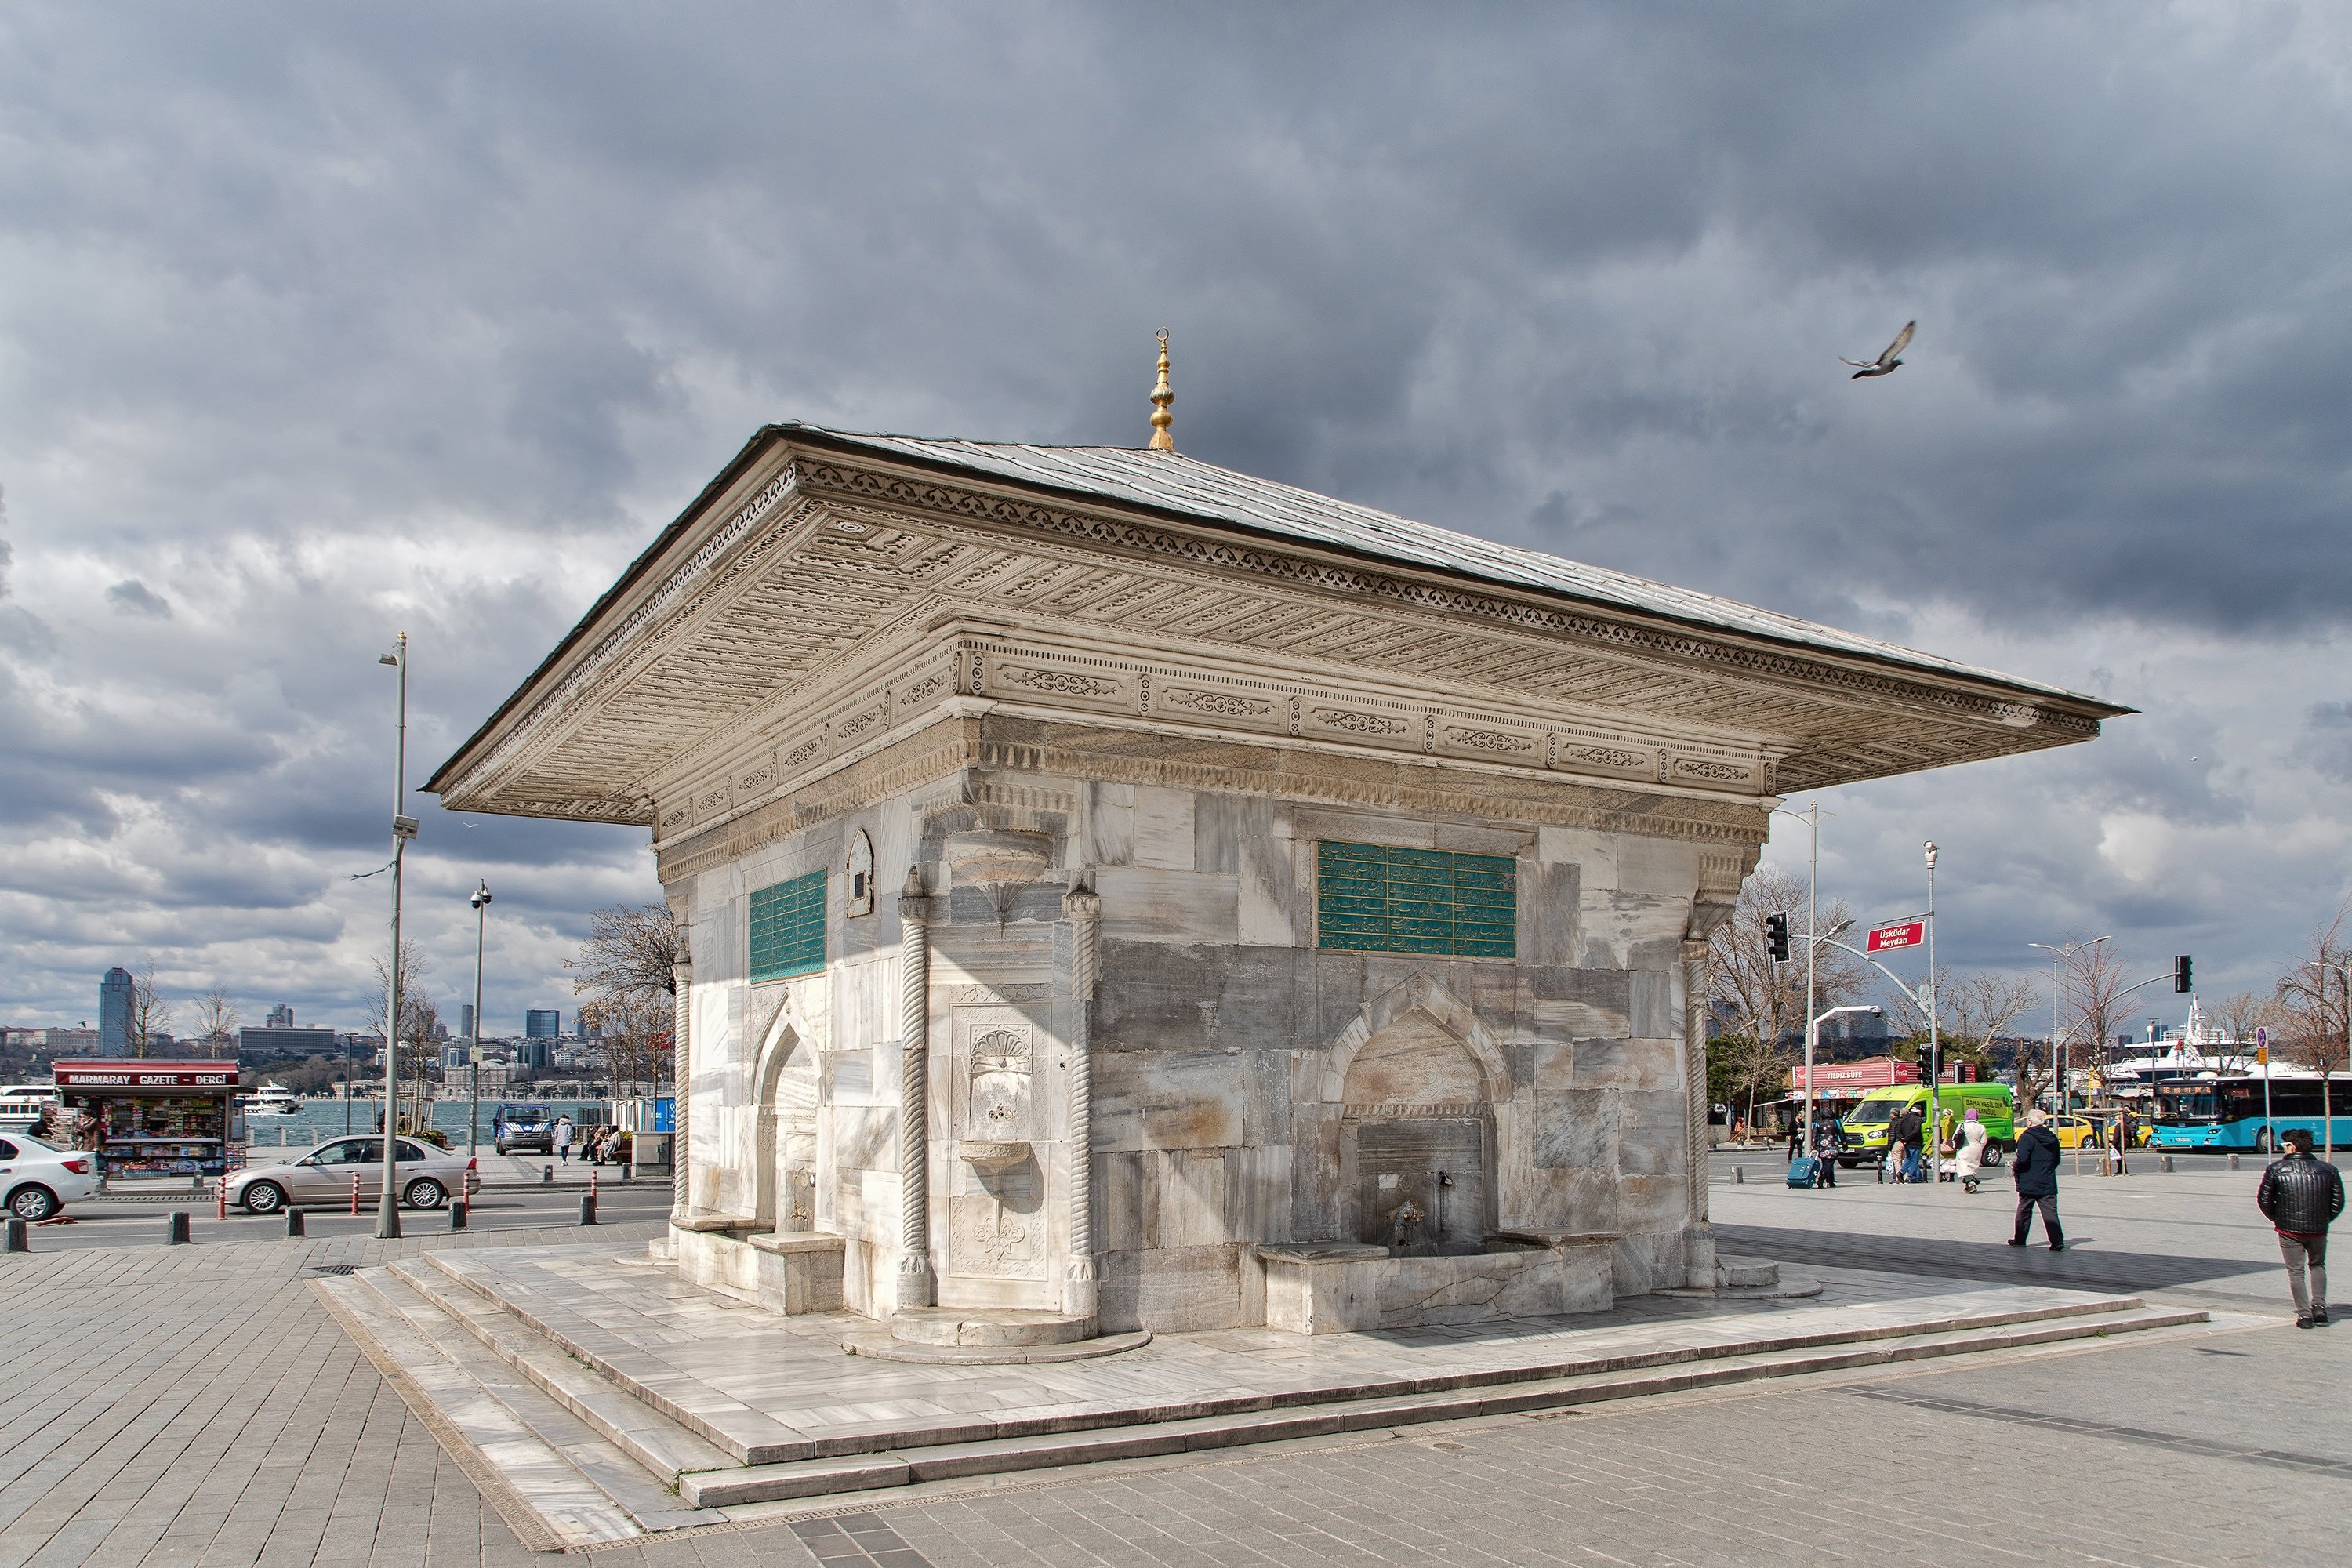 The fountain commissioned by Sultan Ahmed III in Üsküdar district, Istanbul, Turkey, March 18, 2020. (Shutterstock Photo) .